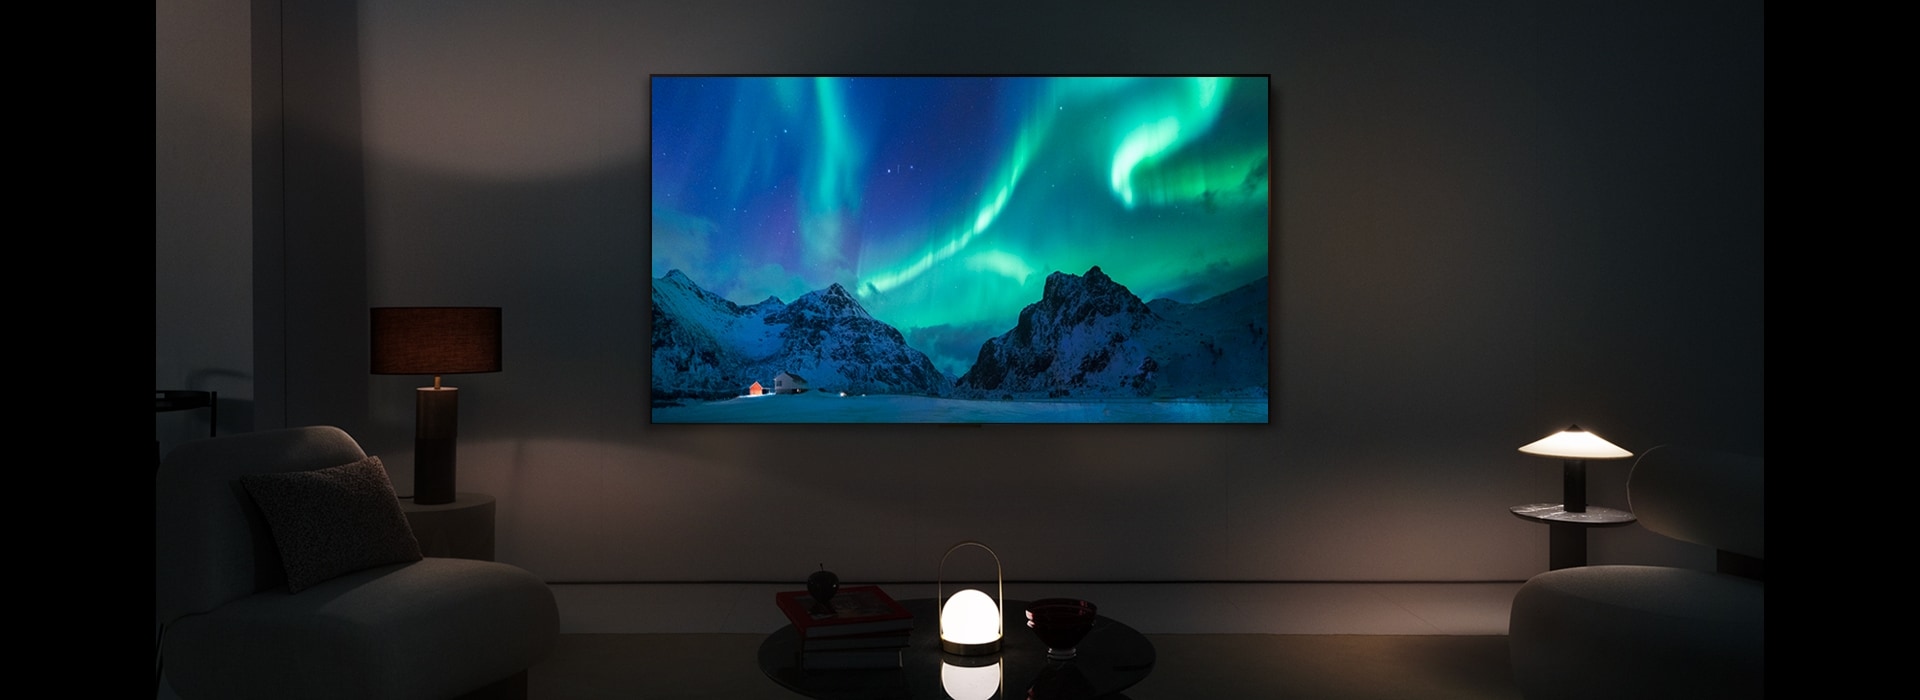 LG OLED TV in a modern living space in nighttime. The screen image of the aurora borealis is displayed with the ideal brightness levels.